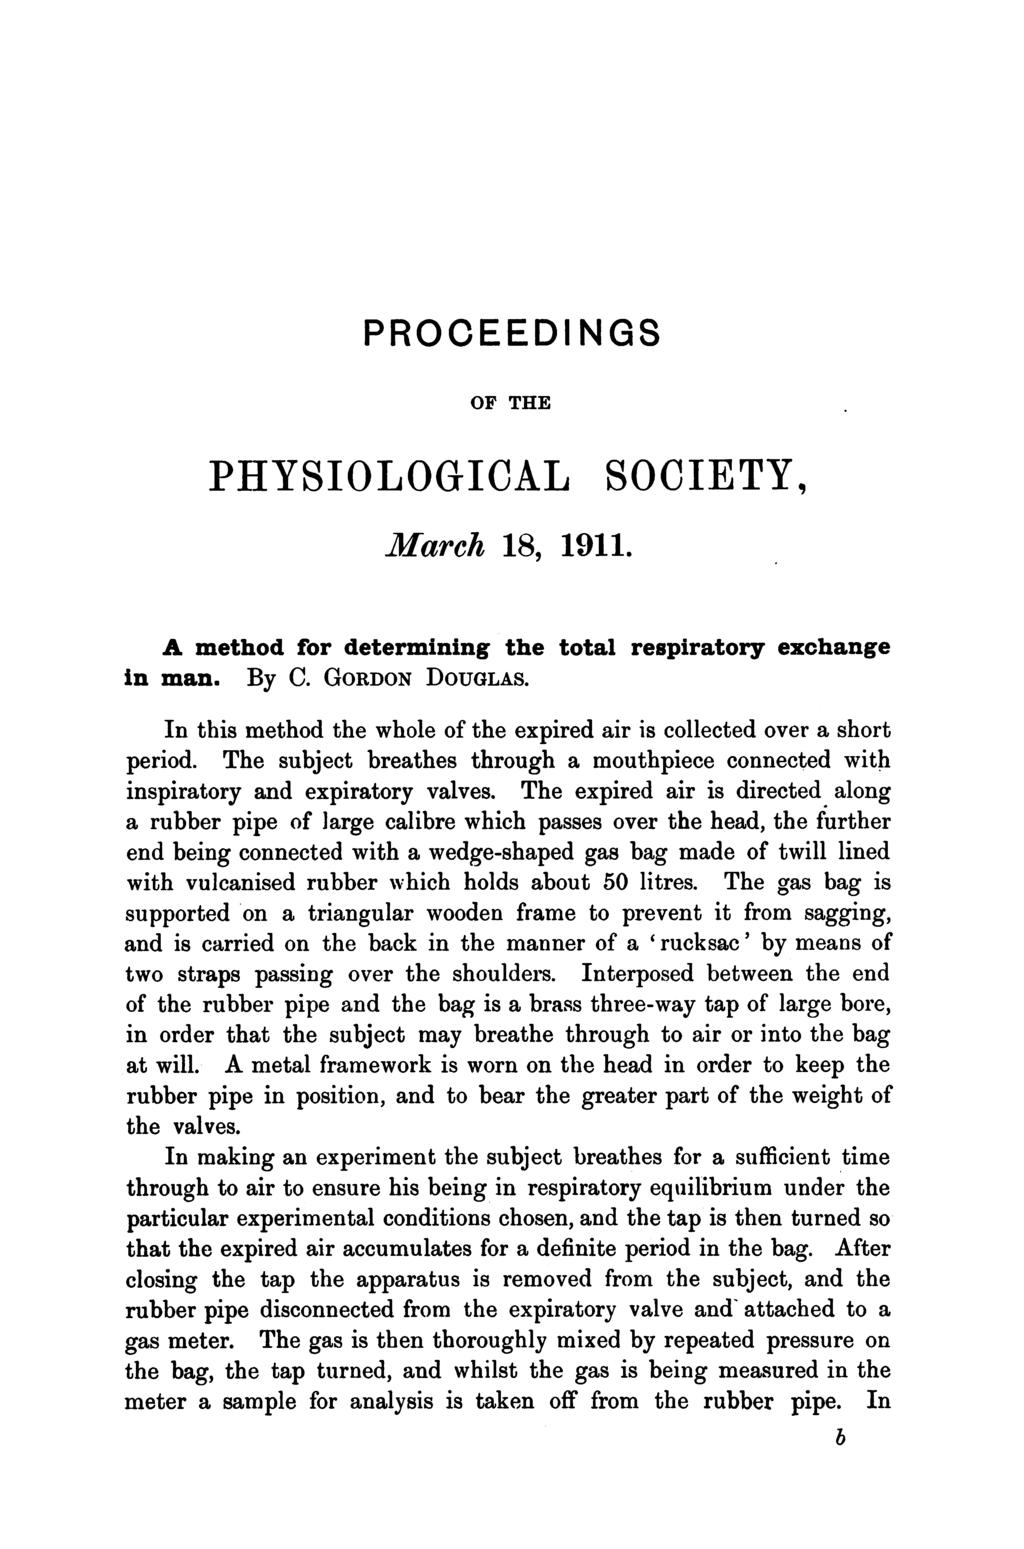 PROCEEDI NGS OF THE PHYSIOLOGICAL SOCIETY, March 18, 1911. A method for determining the total in man. By C. GORDON DOUGLAS.